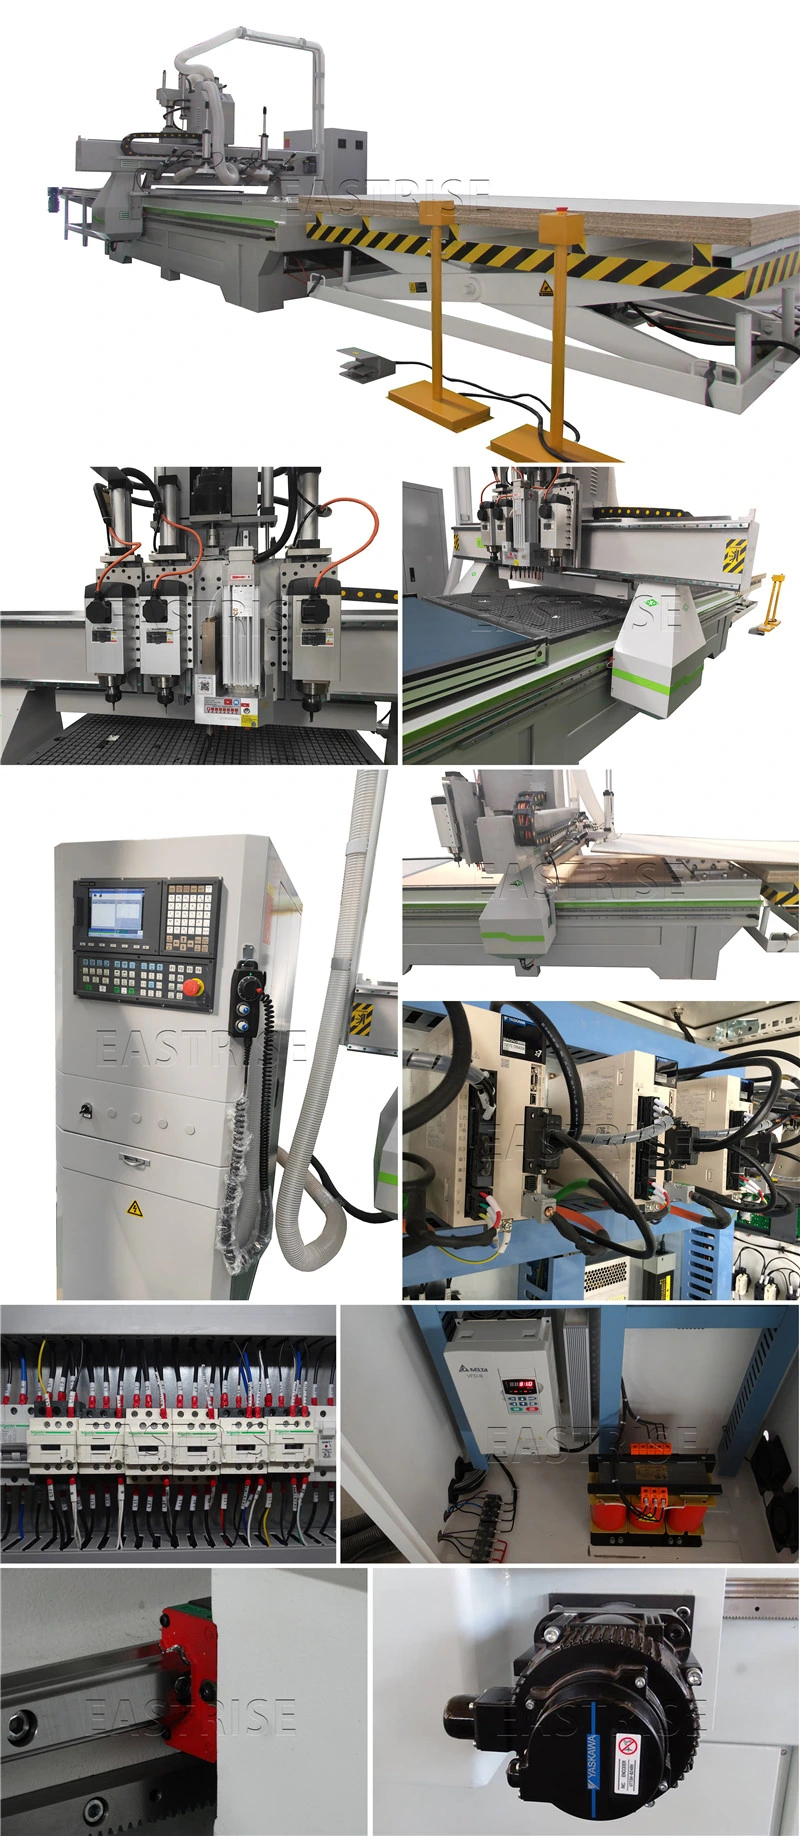 Furniture Equipment 3D Auto Loading and Unload CNC Router Machinery for Cabinet, Atc Nesting CNC Cutting